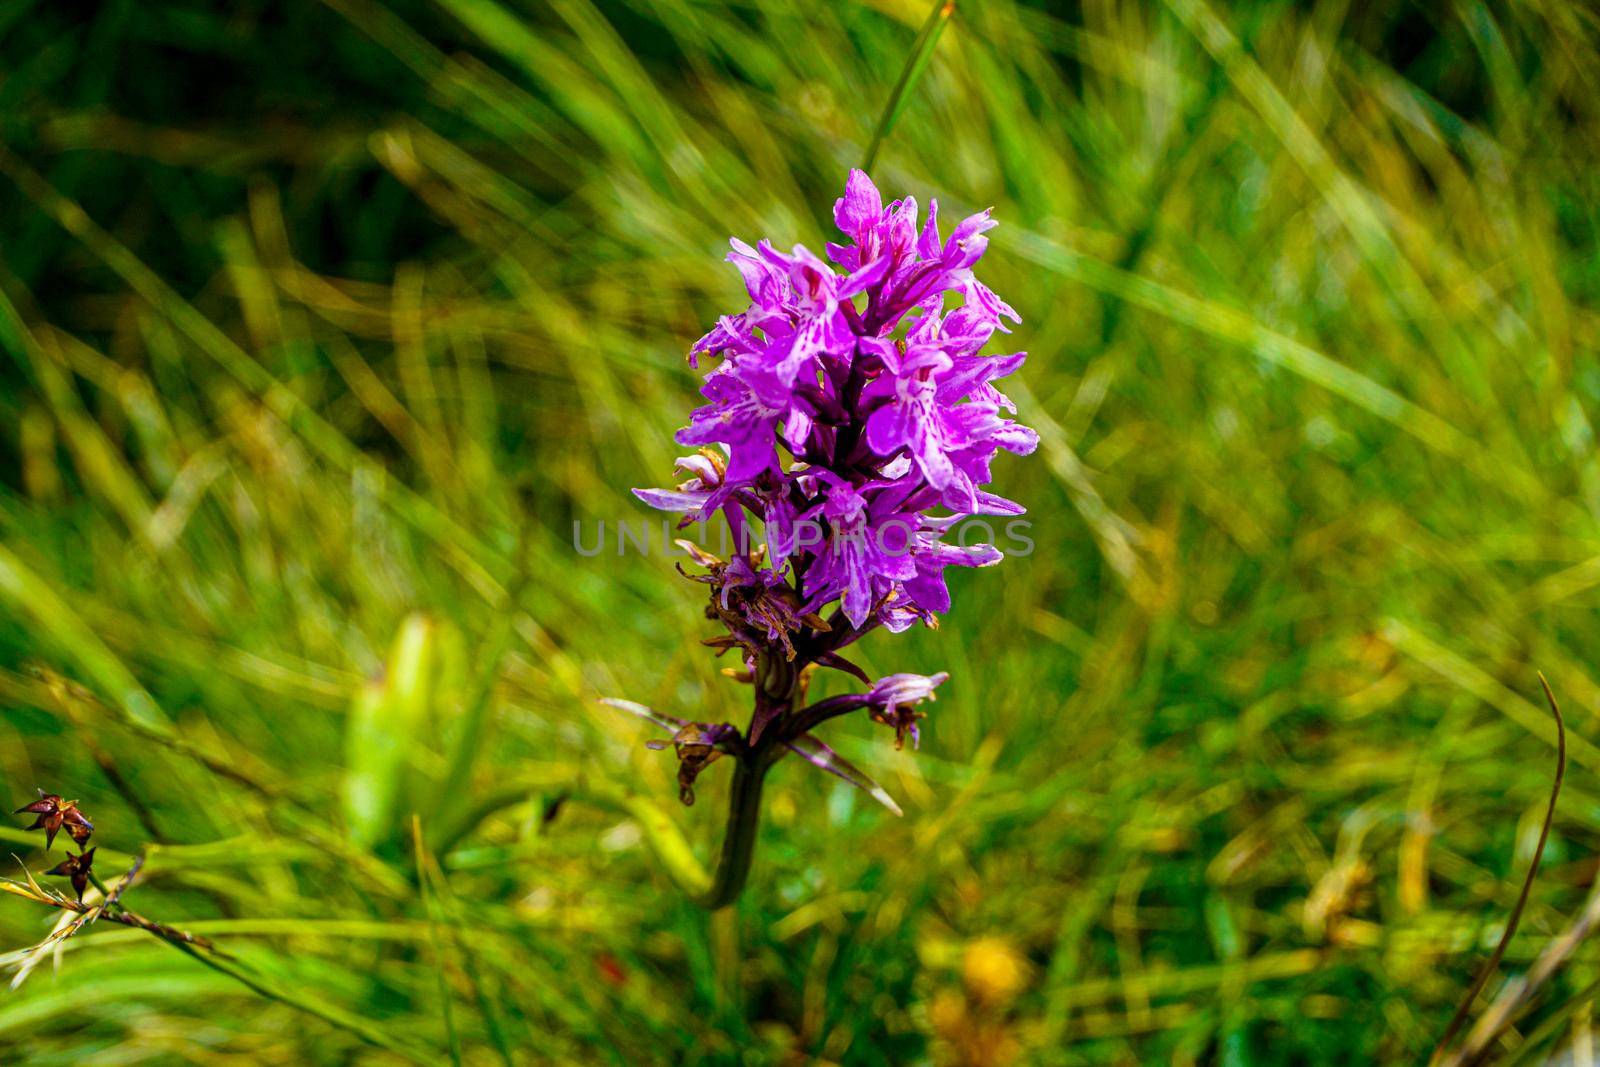 Beautiful blossoms of the heath spotted-orchid Dactylorhiza maculata on a meadow